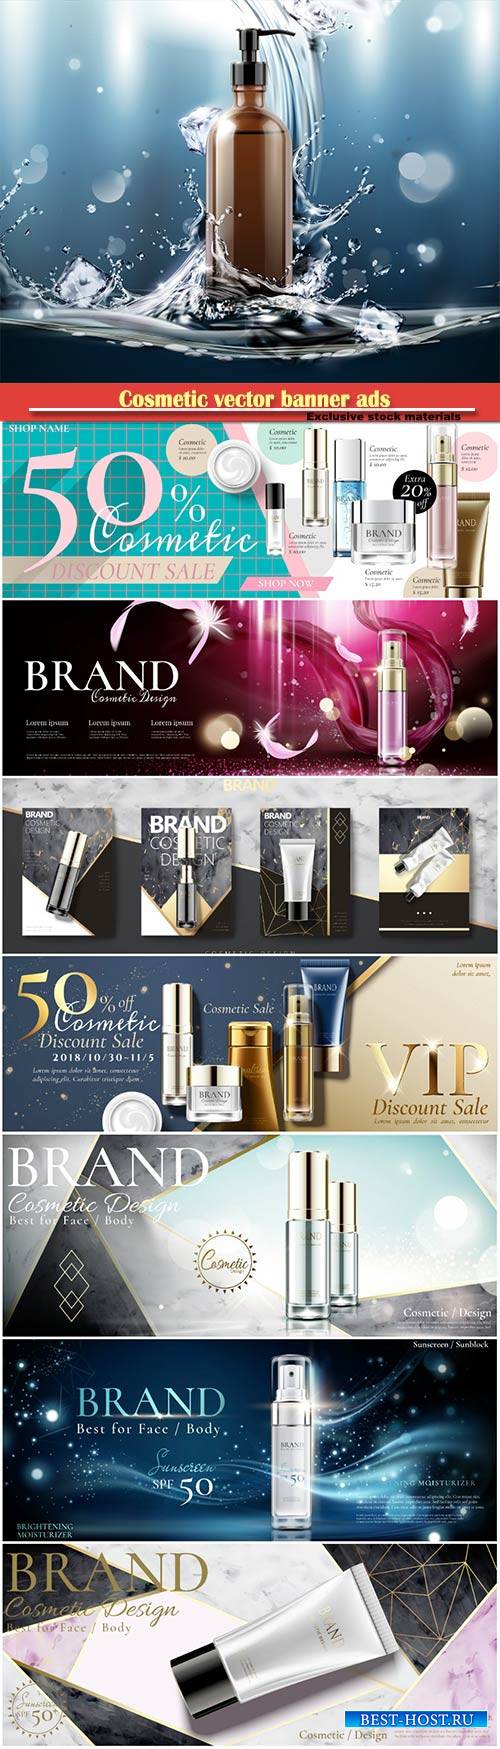 Cosmetic vector banner ads with spray bottle in 3d illustration